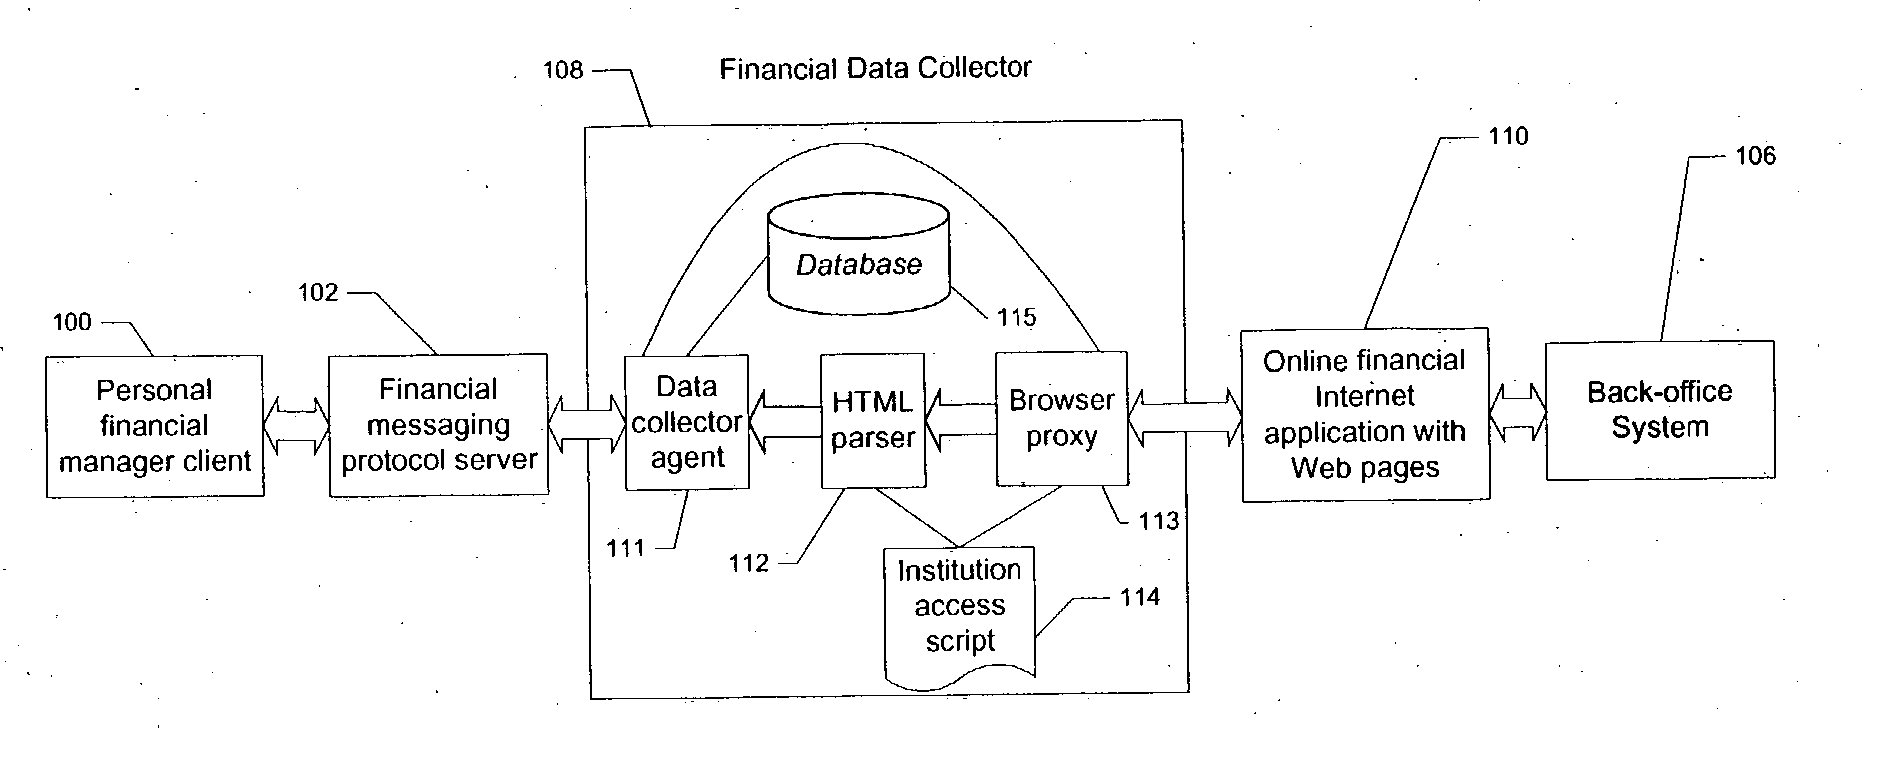 Data collection and transaction initiation using a financial messaging protocol